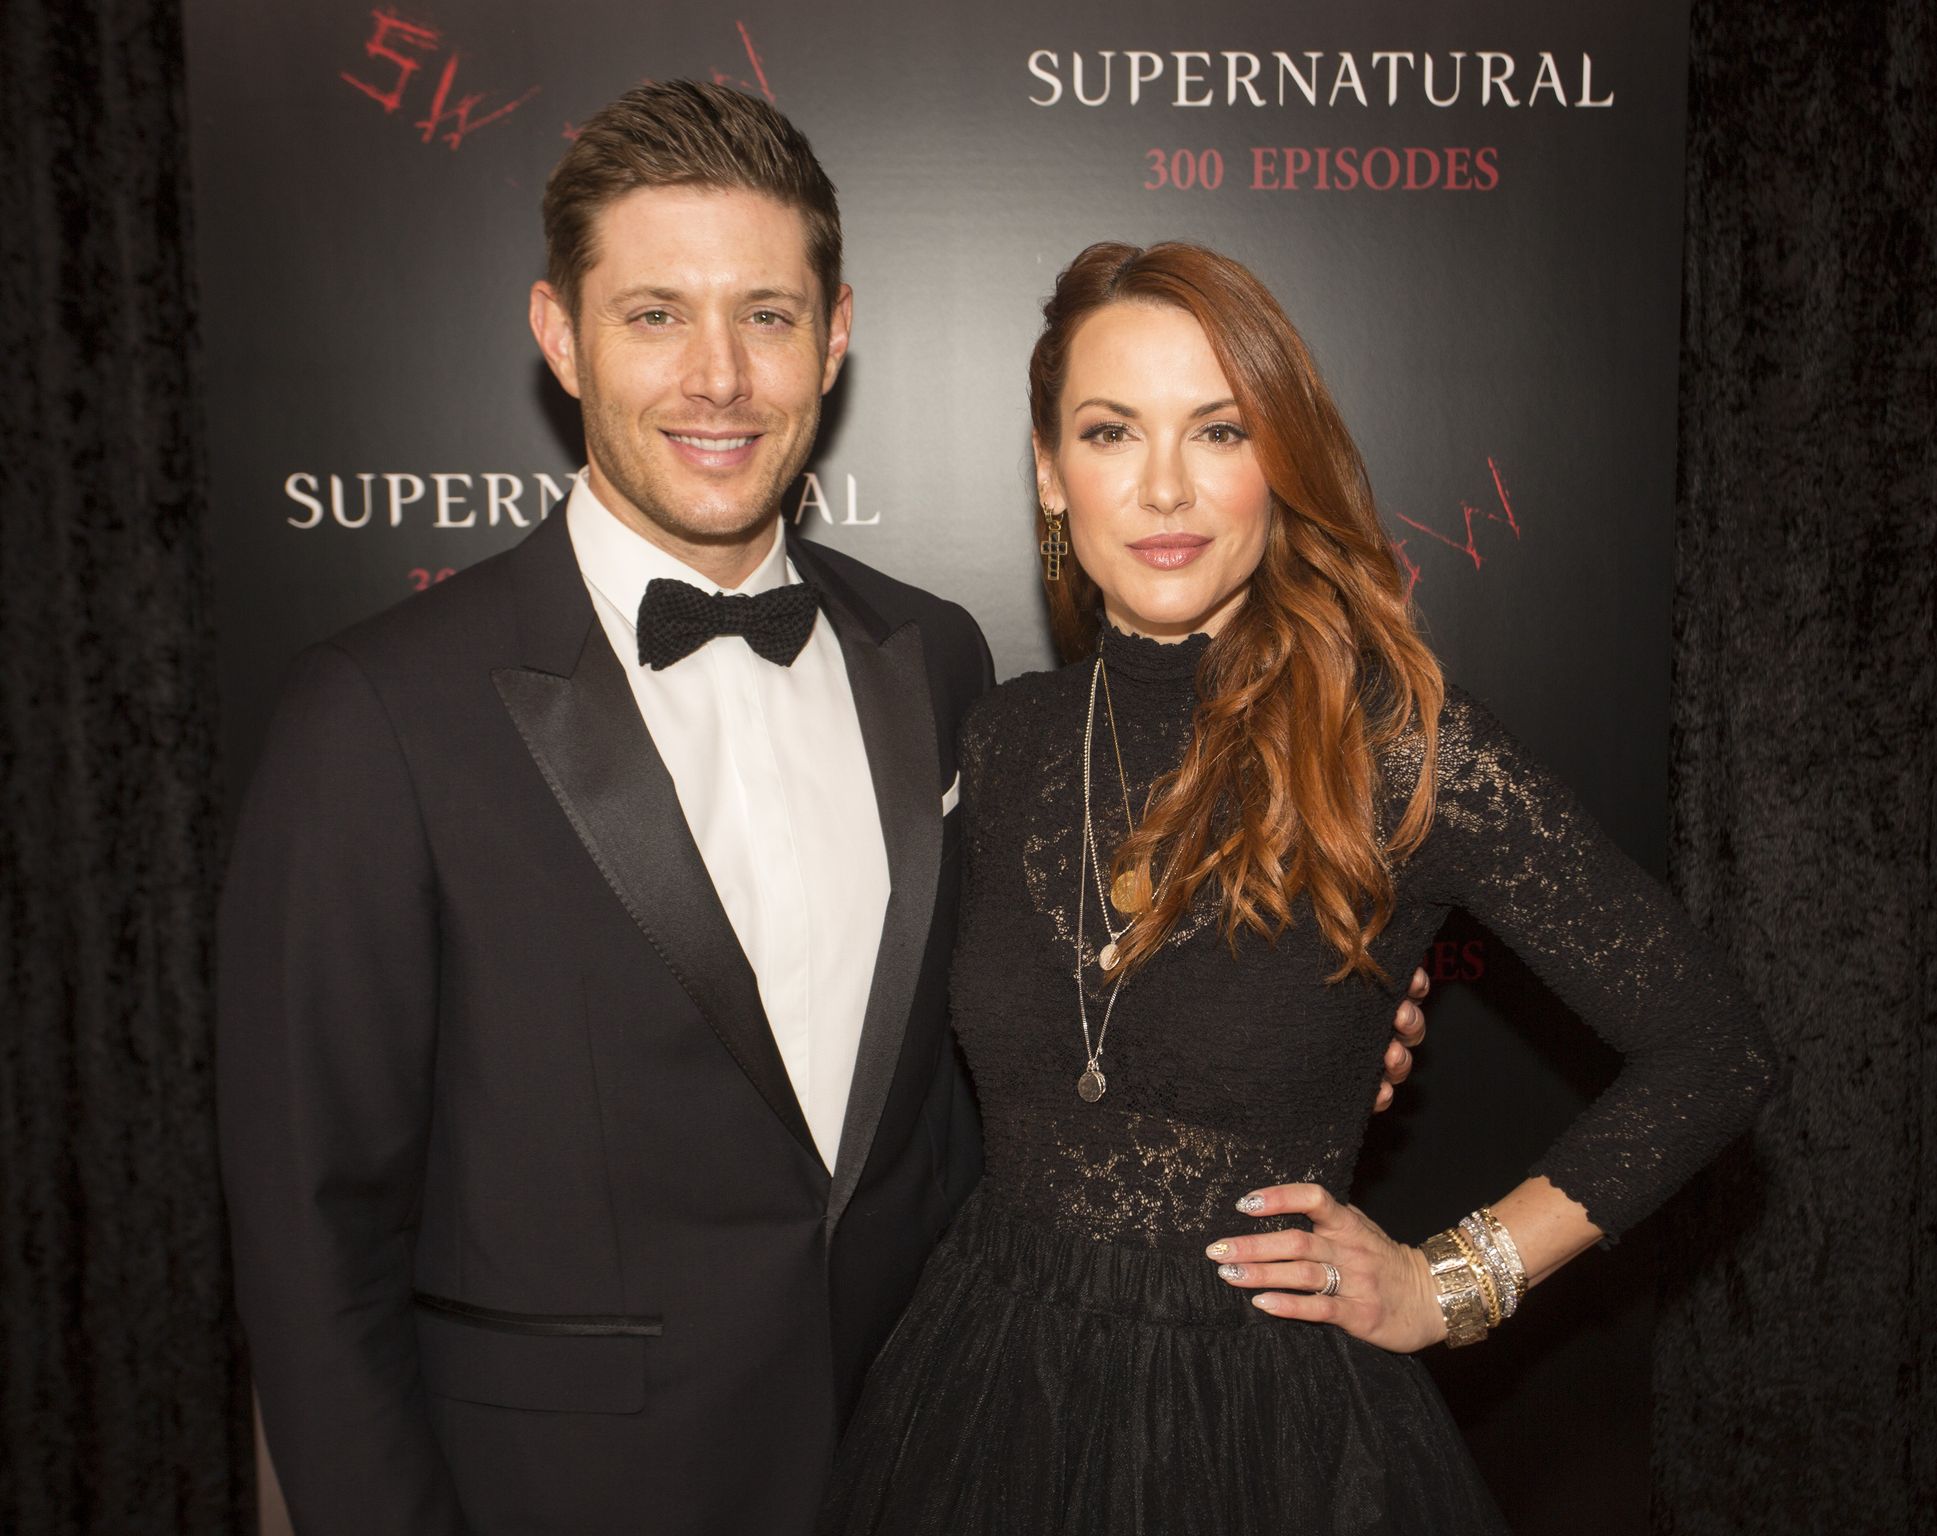 Jensen Ackles and Danneel Ackles at the red carpet at the "SUPERNATURAL" 300TH Episode Celebration in 2018 in Vancouver | Source: Getty Images